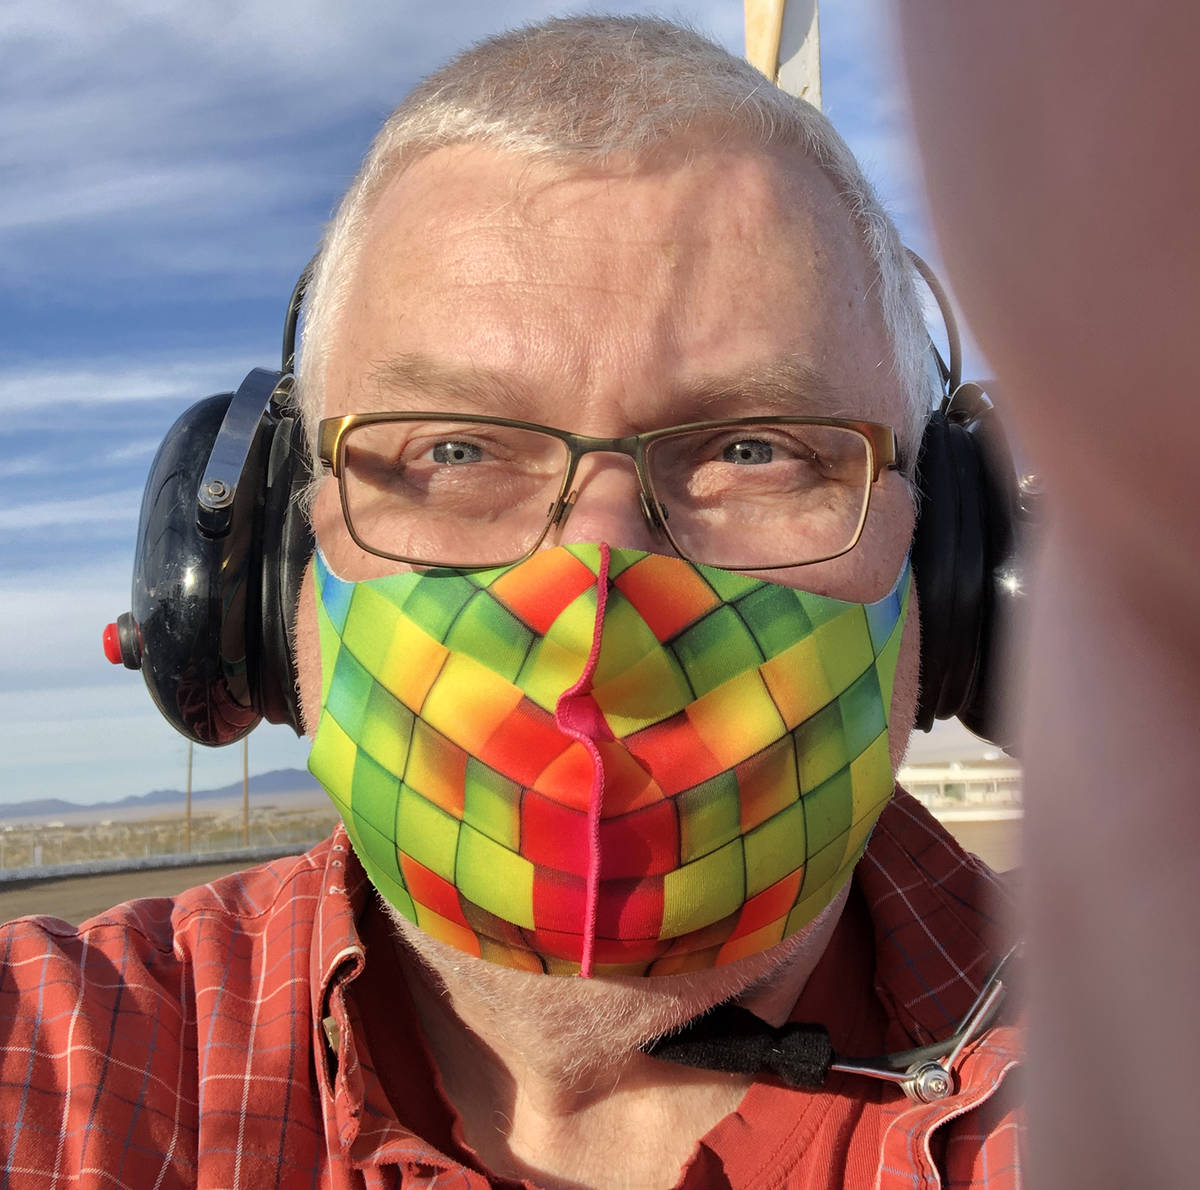 Tom Rysinski/Pahrump Valley Times Mask up, headset on. Ready for racing at Pahrump Valley Speedway.